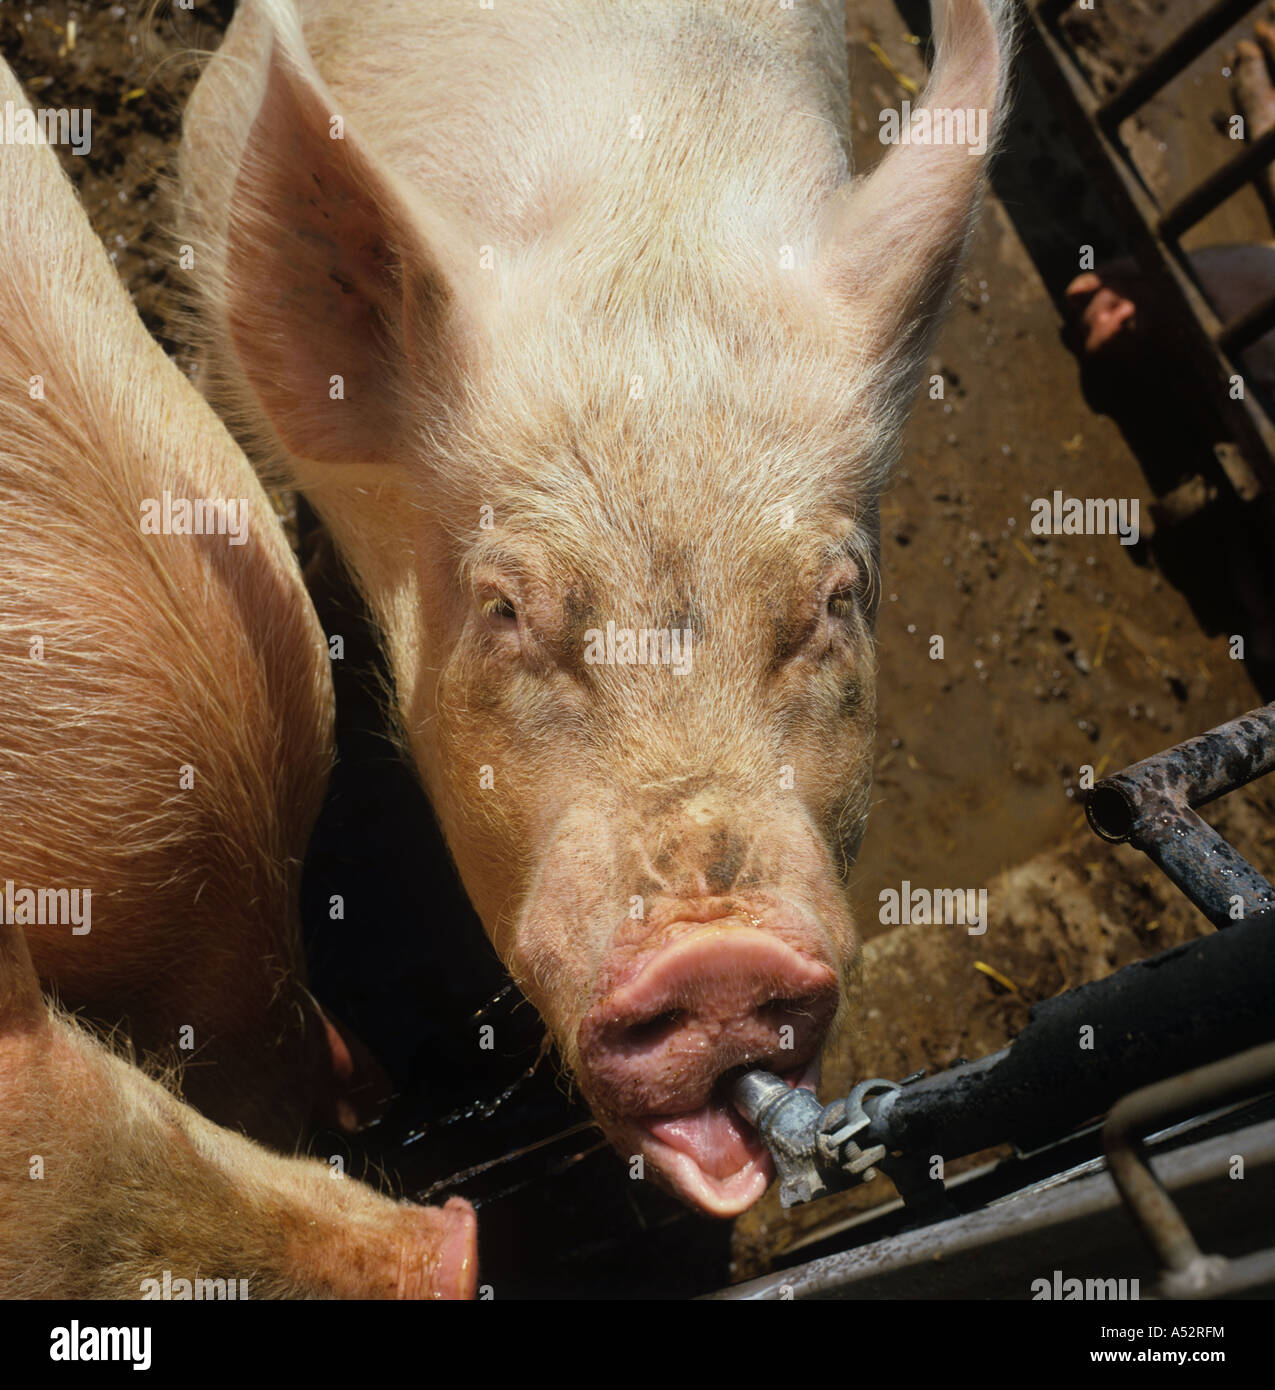 Large white sow drinking from an automatic waterline feeder Stock Photo